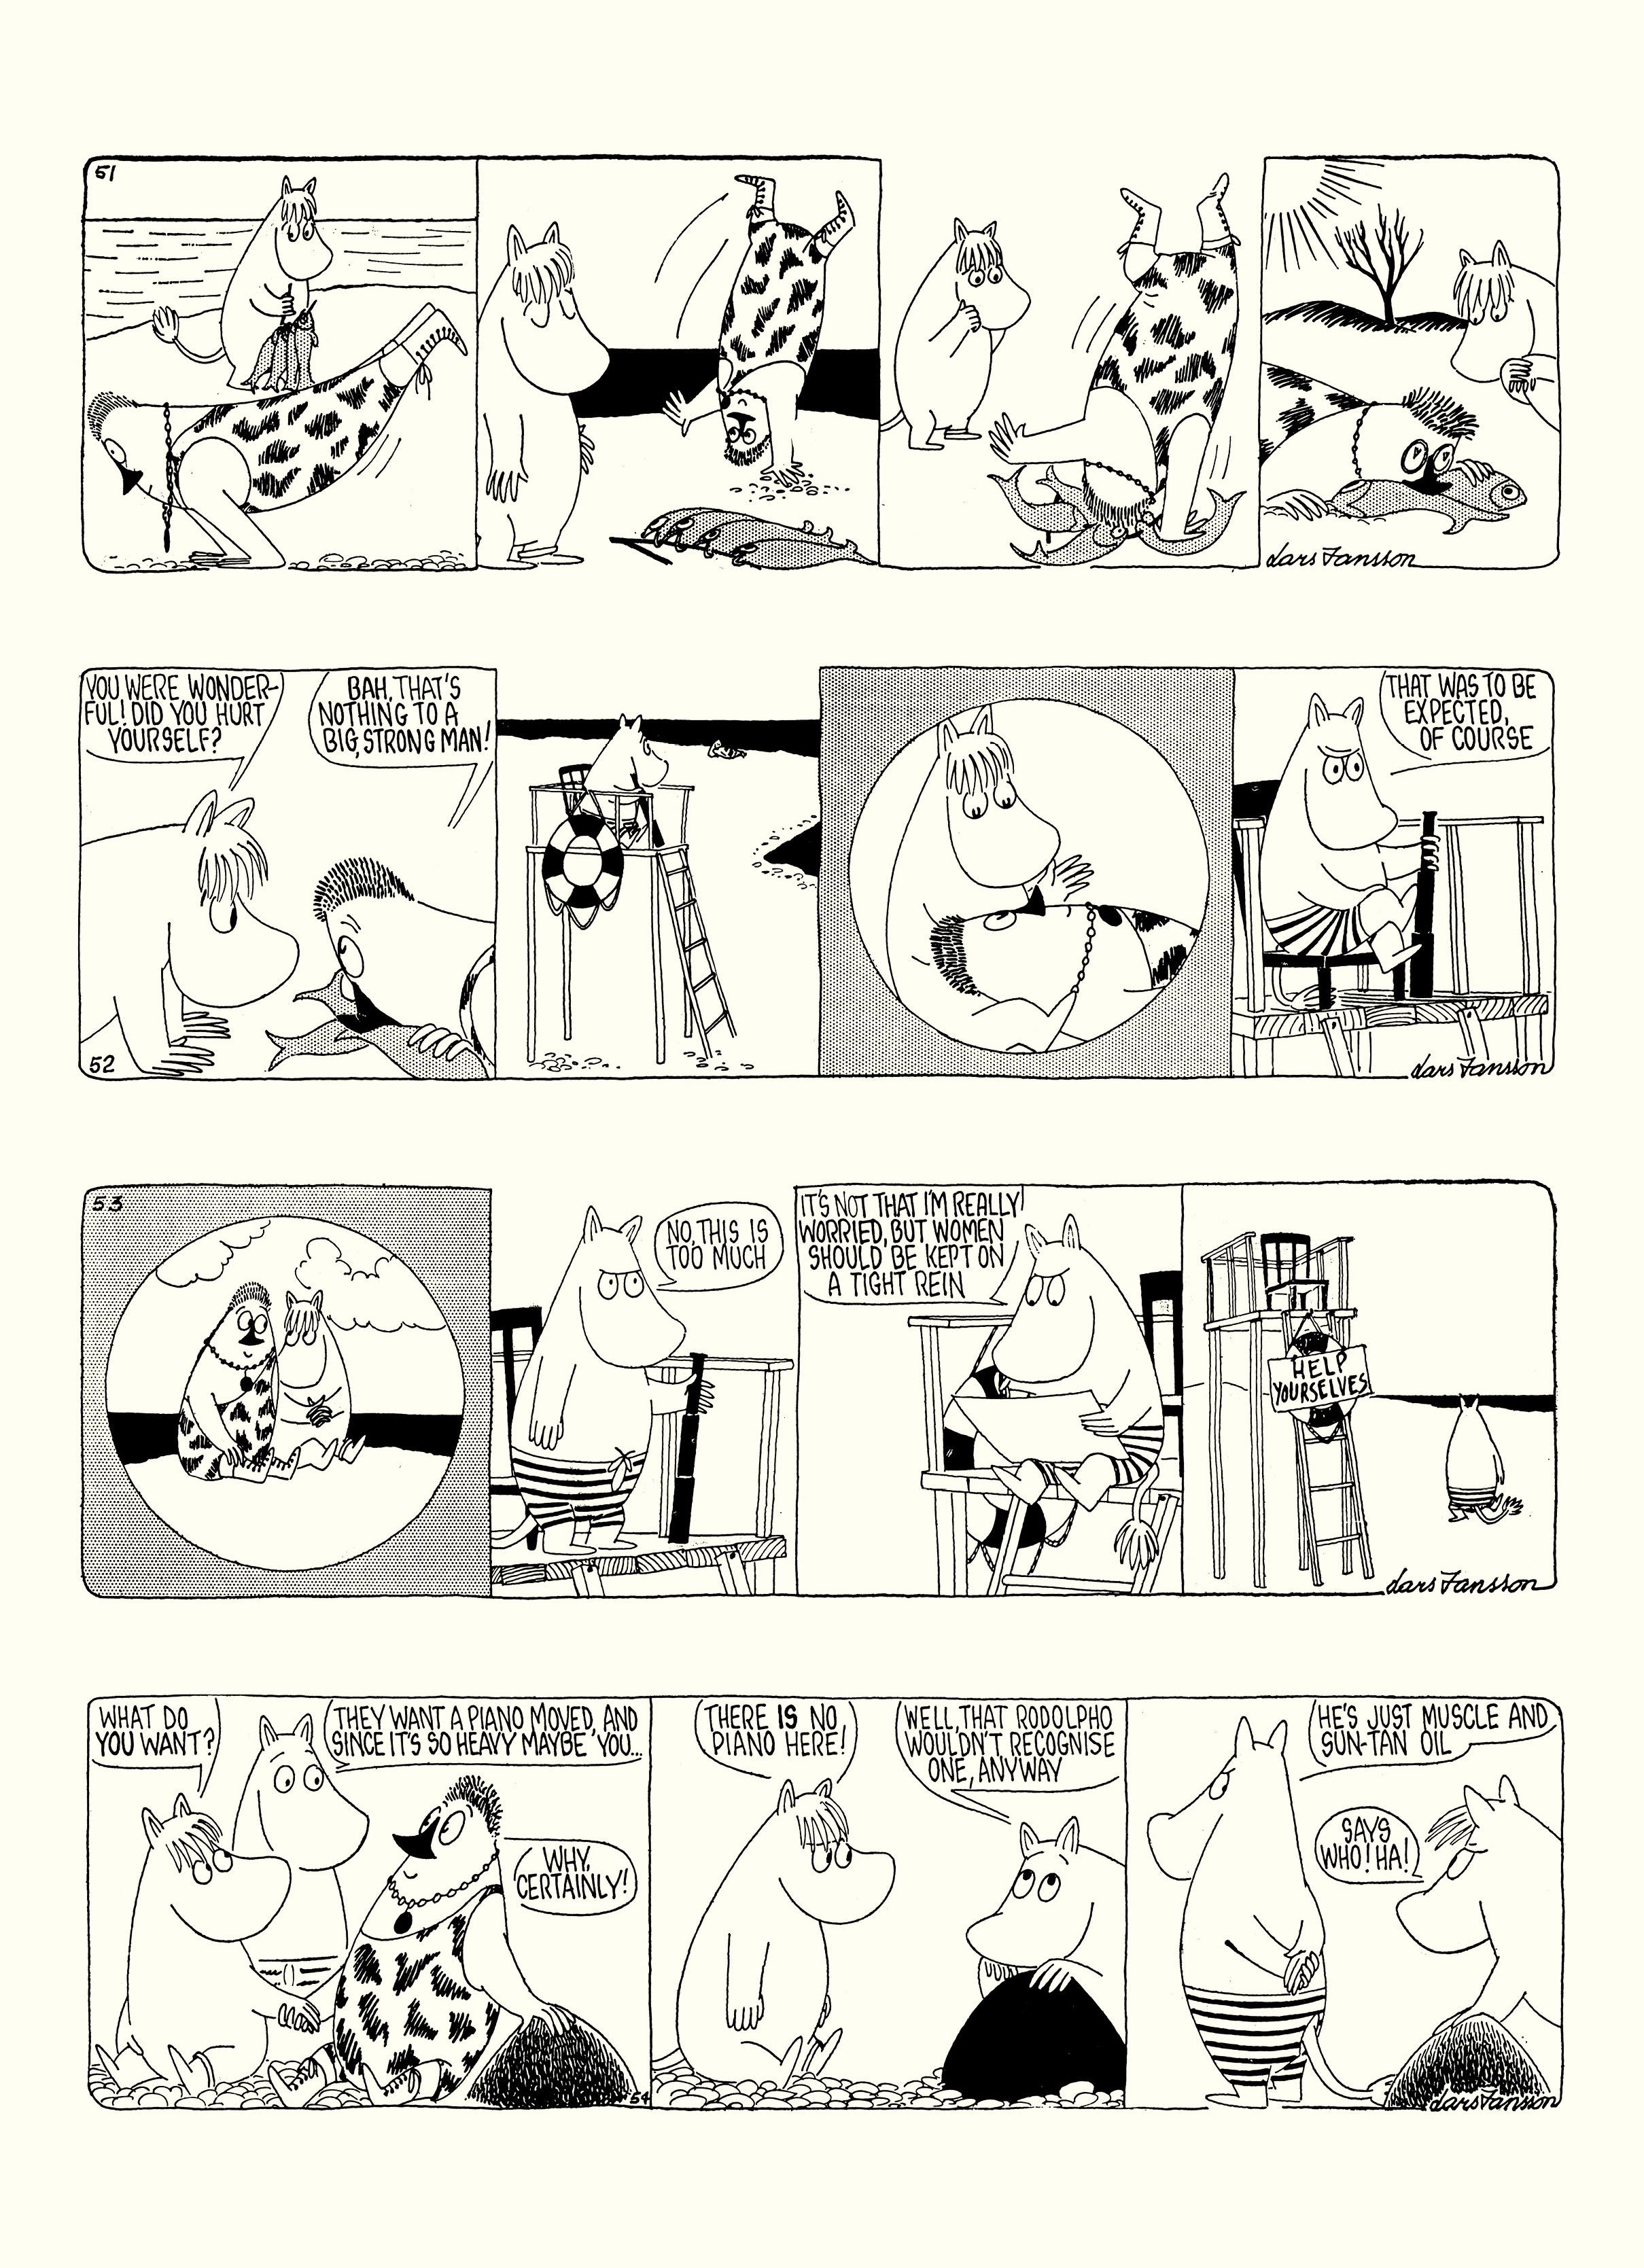 Read online Moomin: The Complete Lars Jansson Comic Strip comic -  Issue # TPB 8 - 64